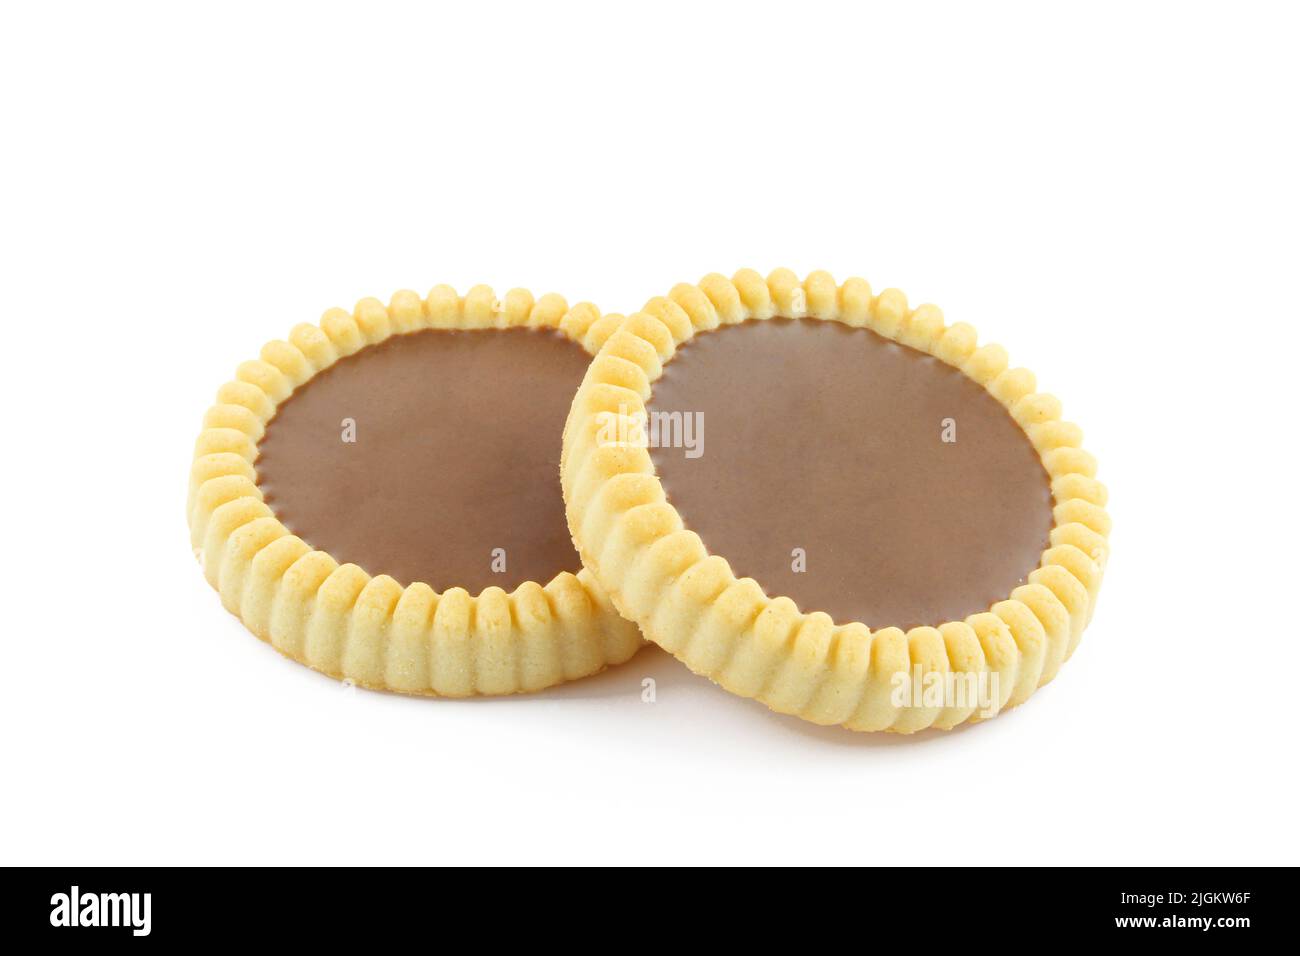 Pair of biscuits filled with chocolate isolated on white background Stock Photo